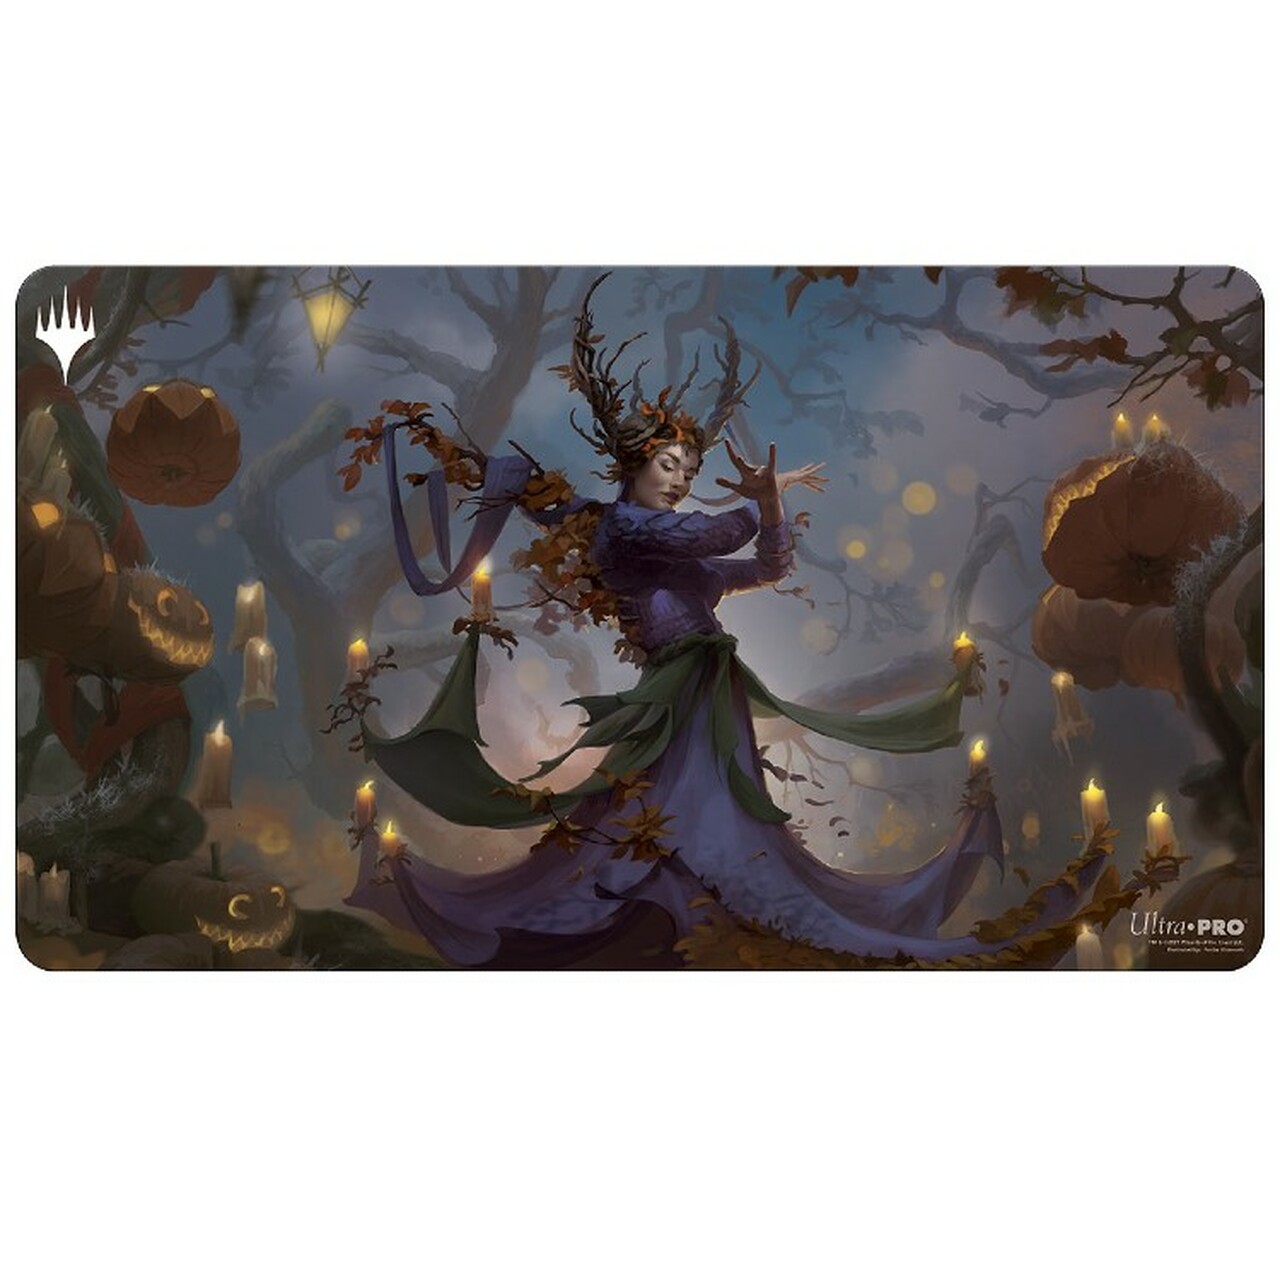 Details about   F3277 Fantasy Girl Dragon Magic The Gathering MTG Card Game Playmat Deck Playmat 